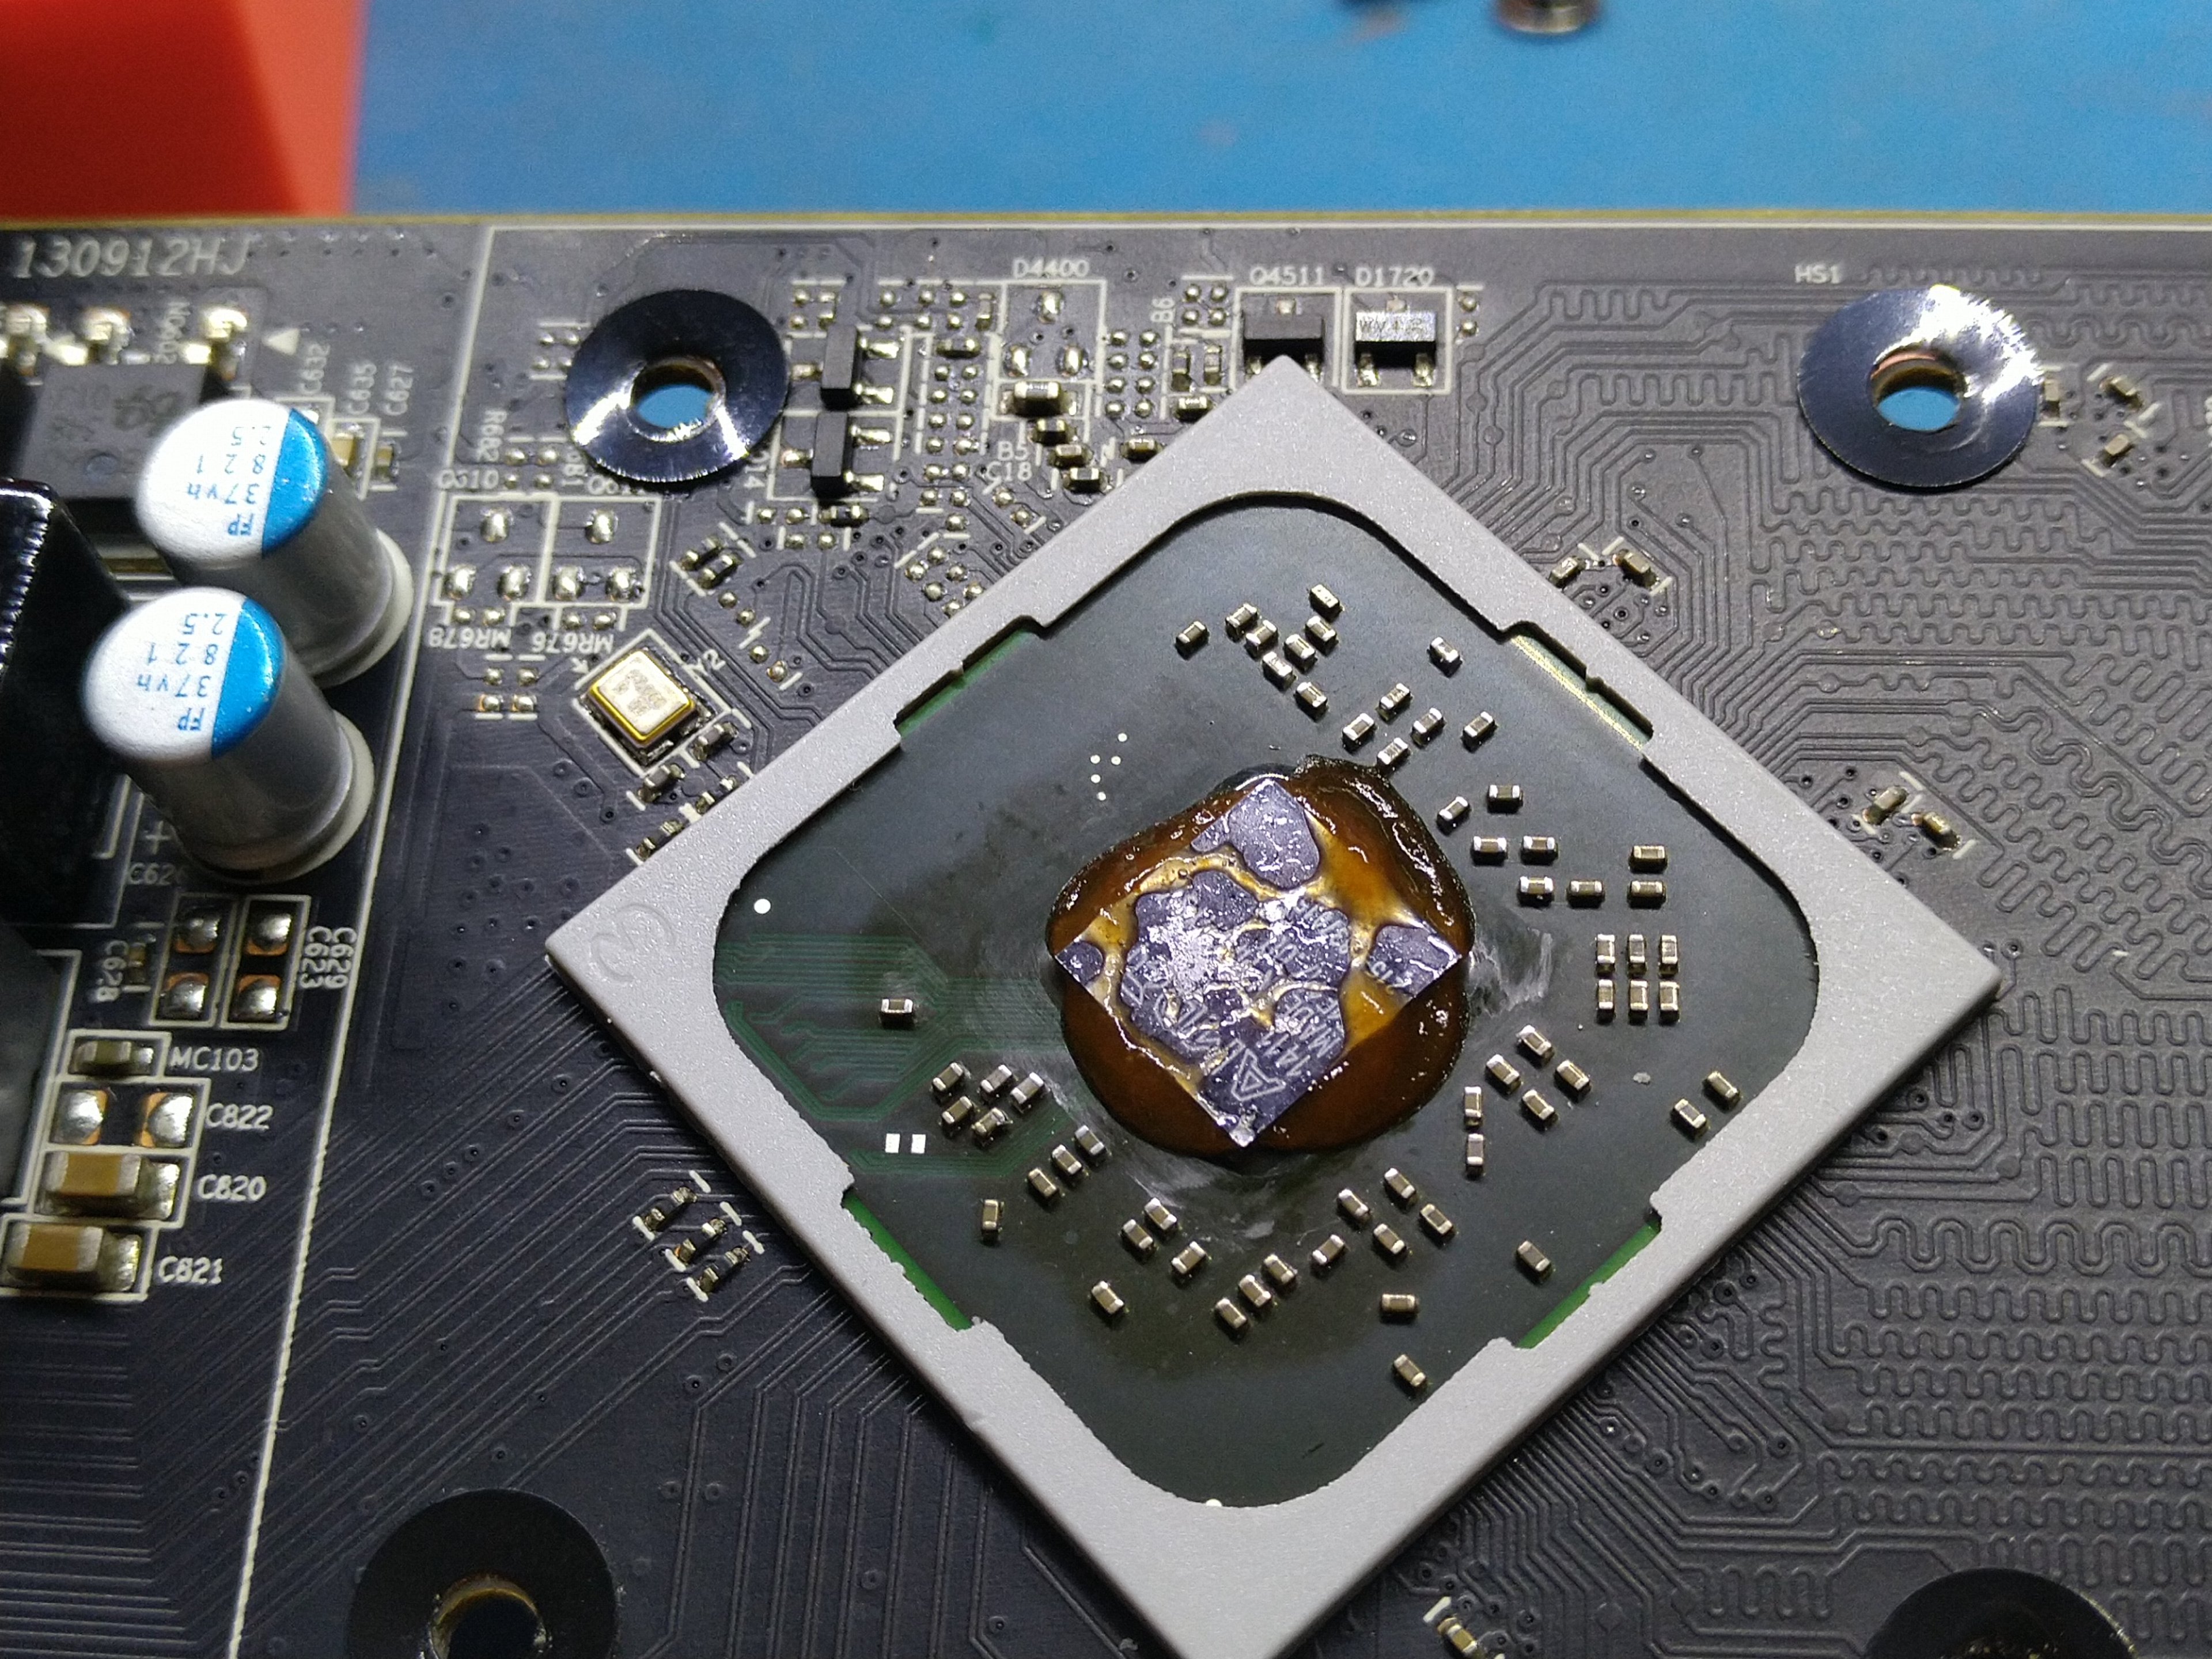 Ketchup and toothpaste shown to be effective thermal paste substitutes for cooling W AMD Radeon R7 240 - NotebookCheck.net